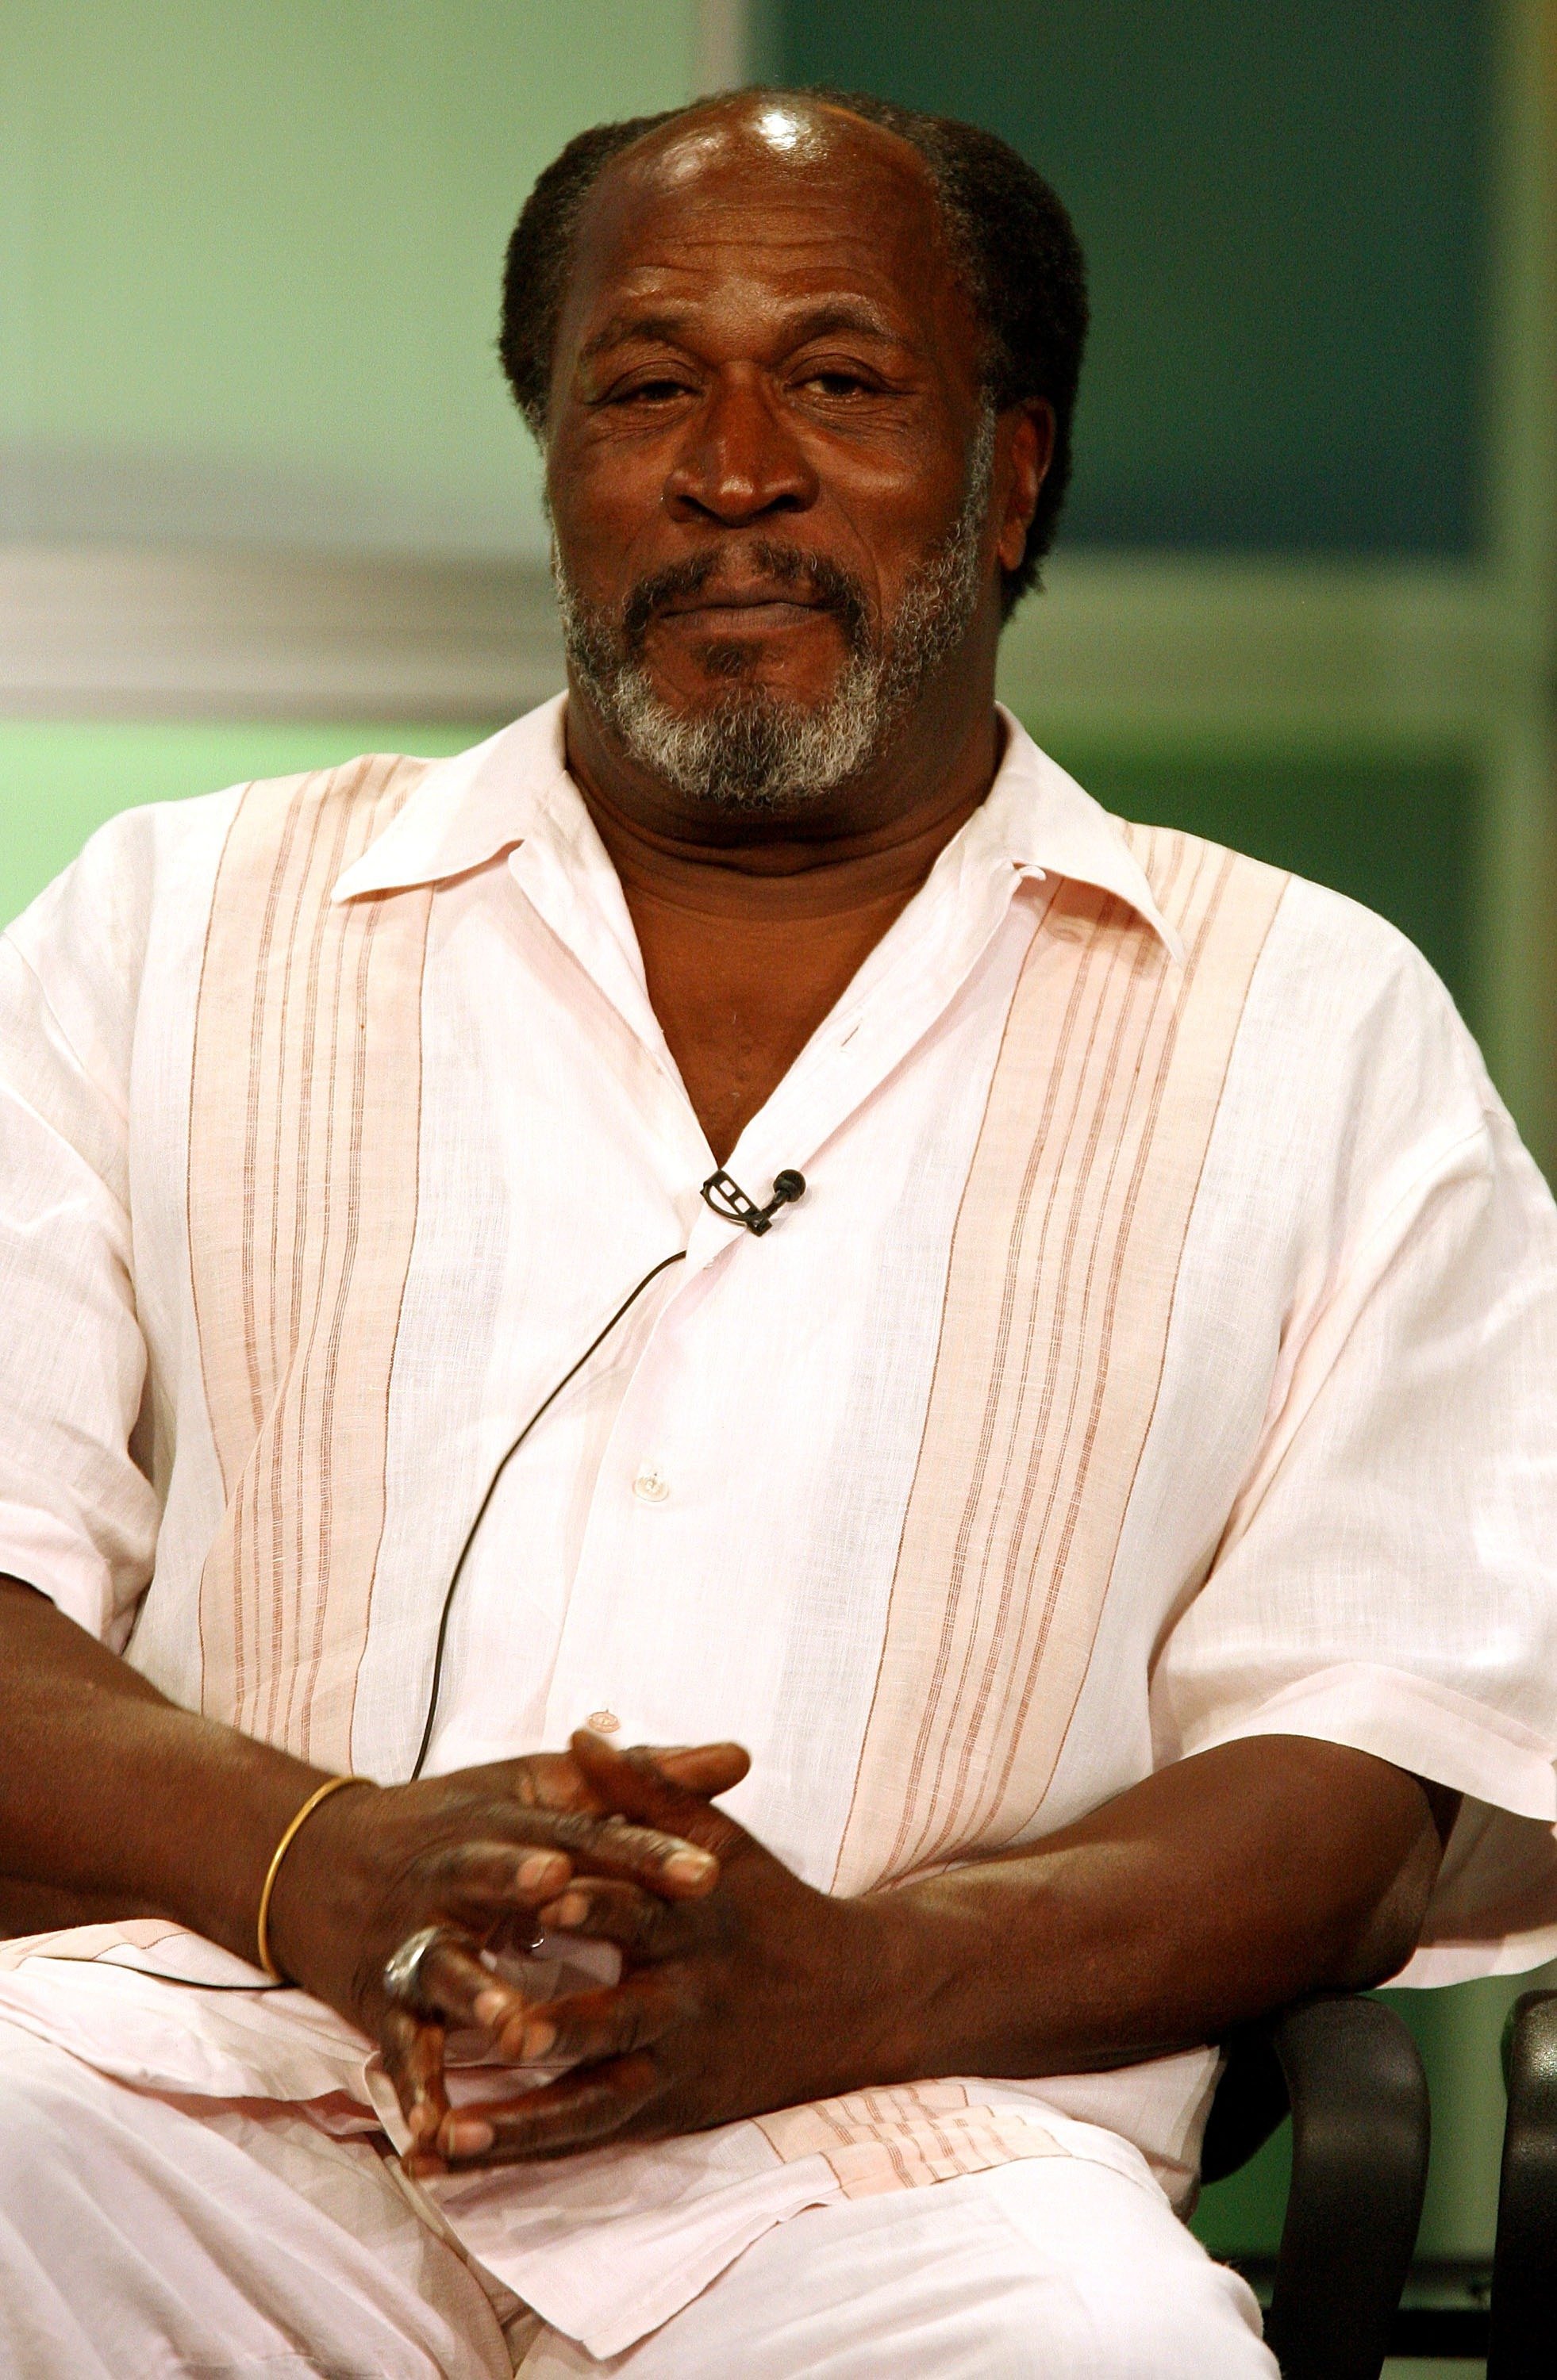 John Amos of "Men In Trees" speaks during the 2007 Summer Television Critics Association Press Tour for ABC held at the Beverly Hilton hotel on July 26, 2007 | Photo: GettyImages